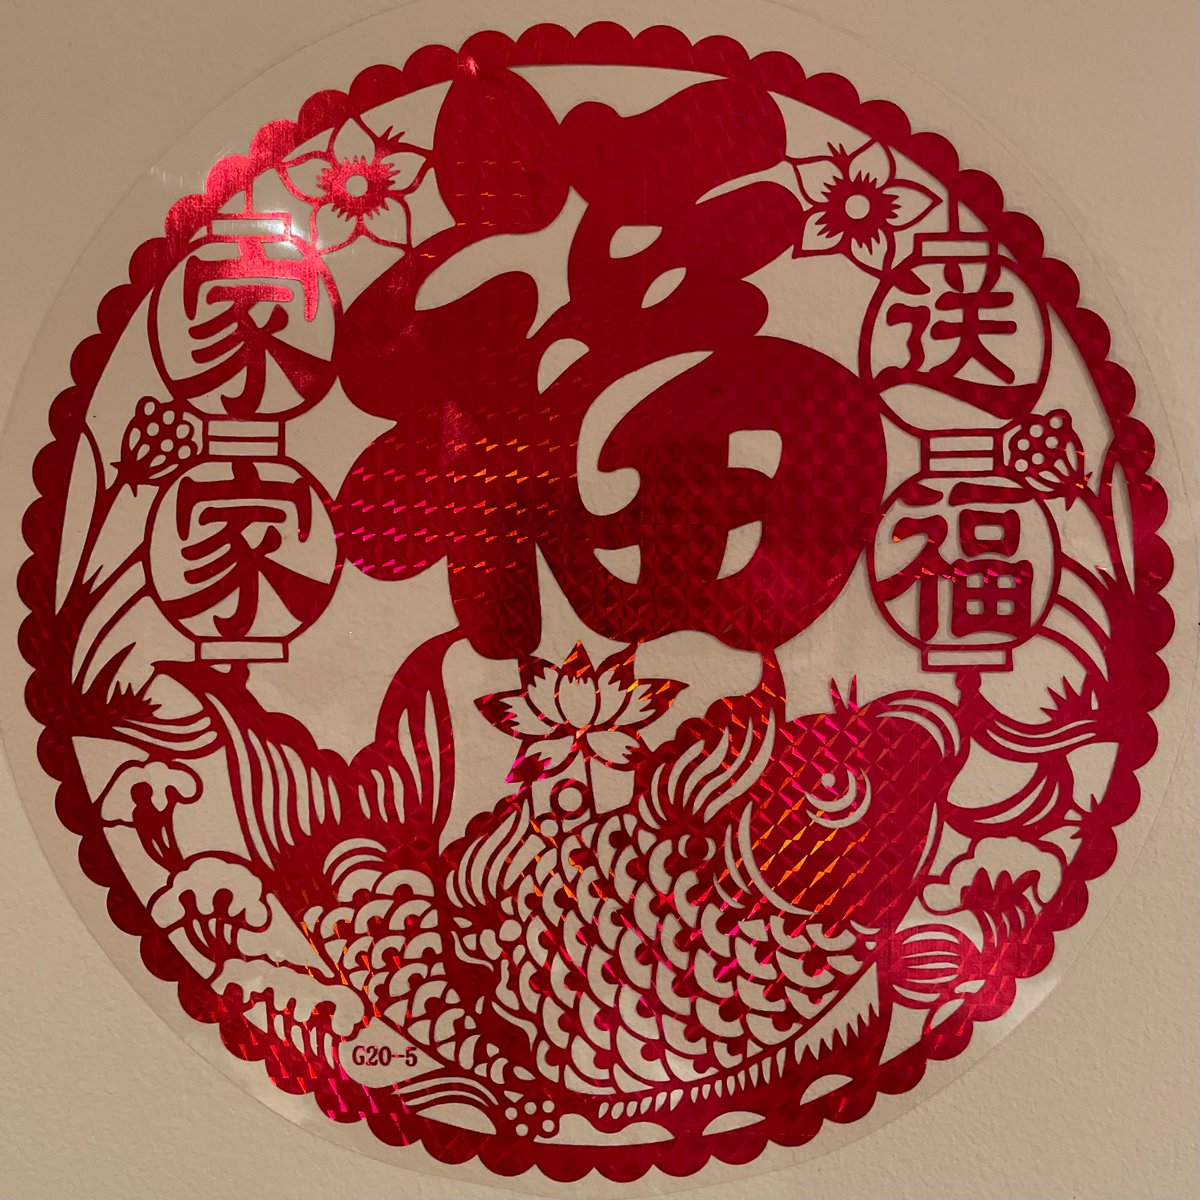 Happy New Year, Happy Spring Festival and Happy Year of the Dragon everyone!